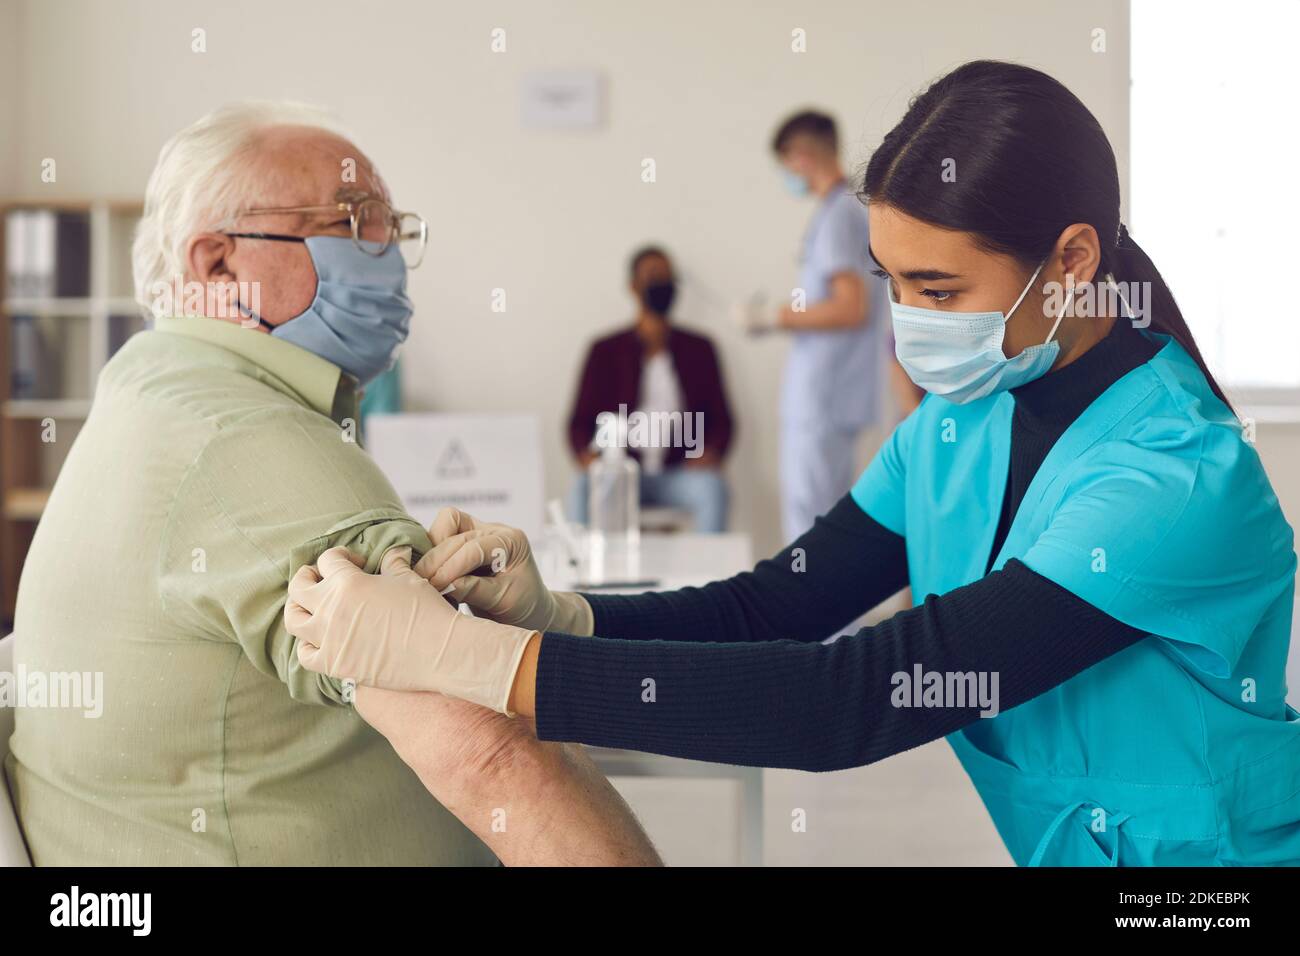 Woman doctor nurse in medical uniform and protective mask making vaccination senior elderly man Stock Photo